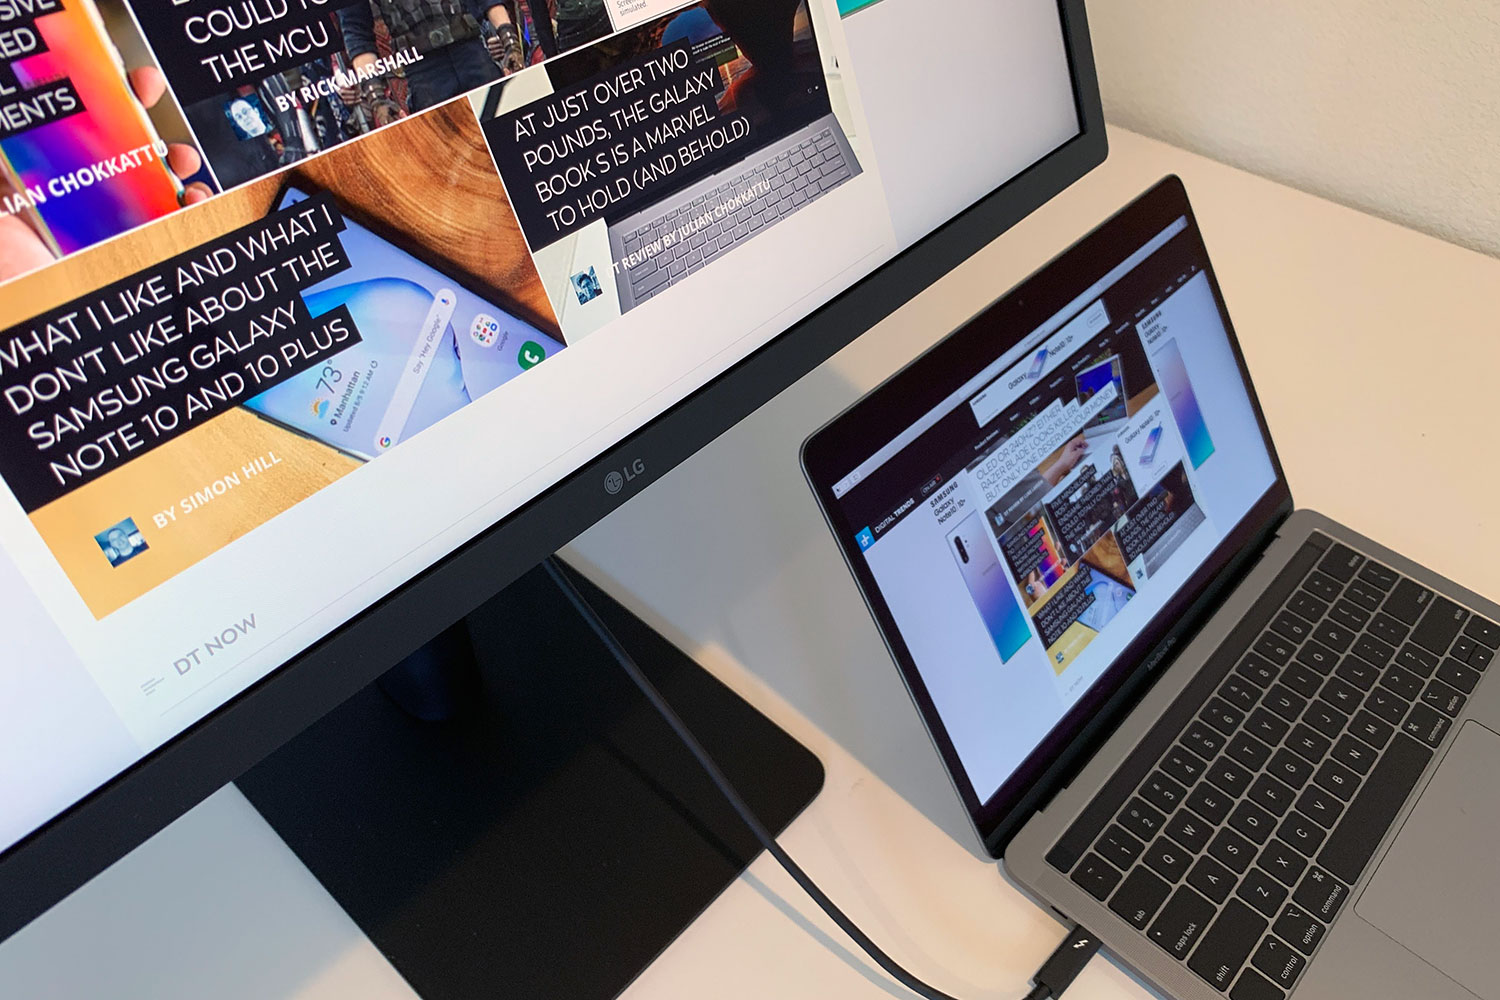 LG UltraFine 4K Display review: Two screens for the price of one